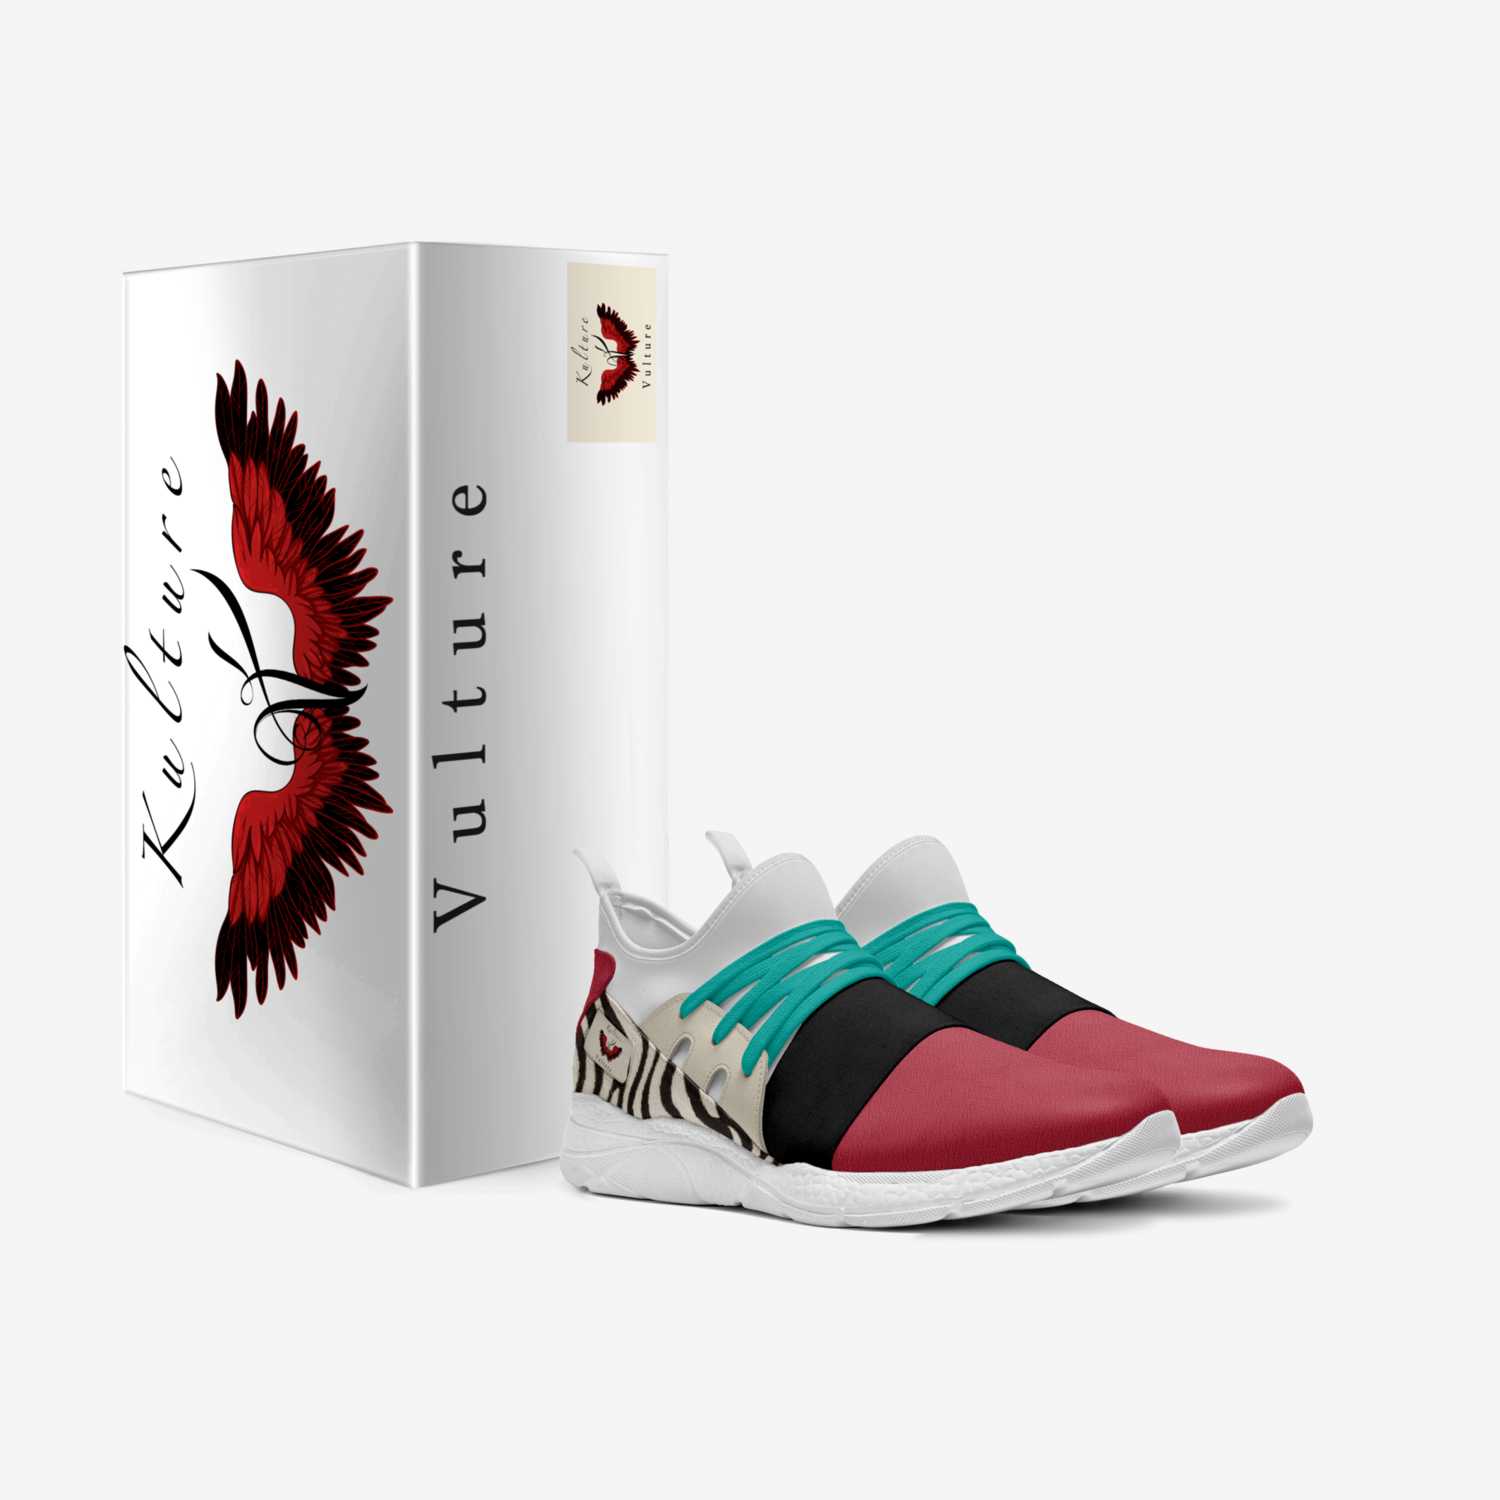 KULTURE VULTURE 9 custom made in Italy shoes by Black Art | Box view